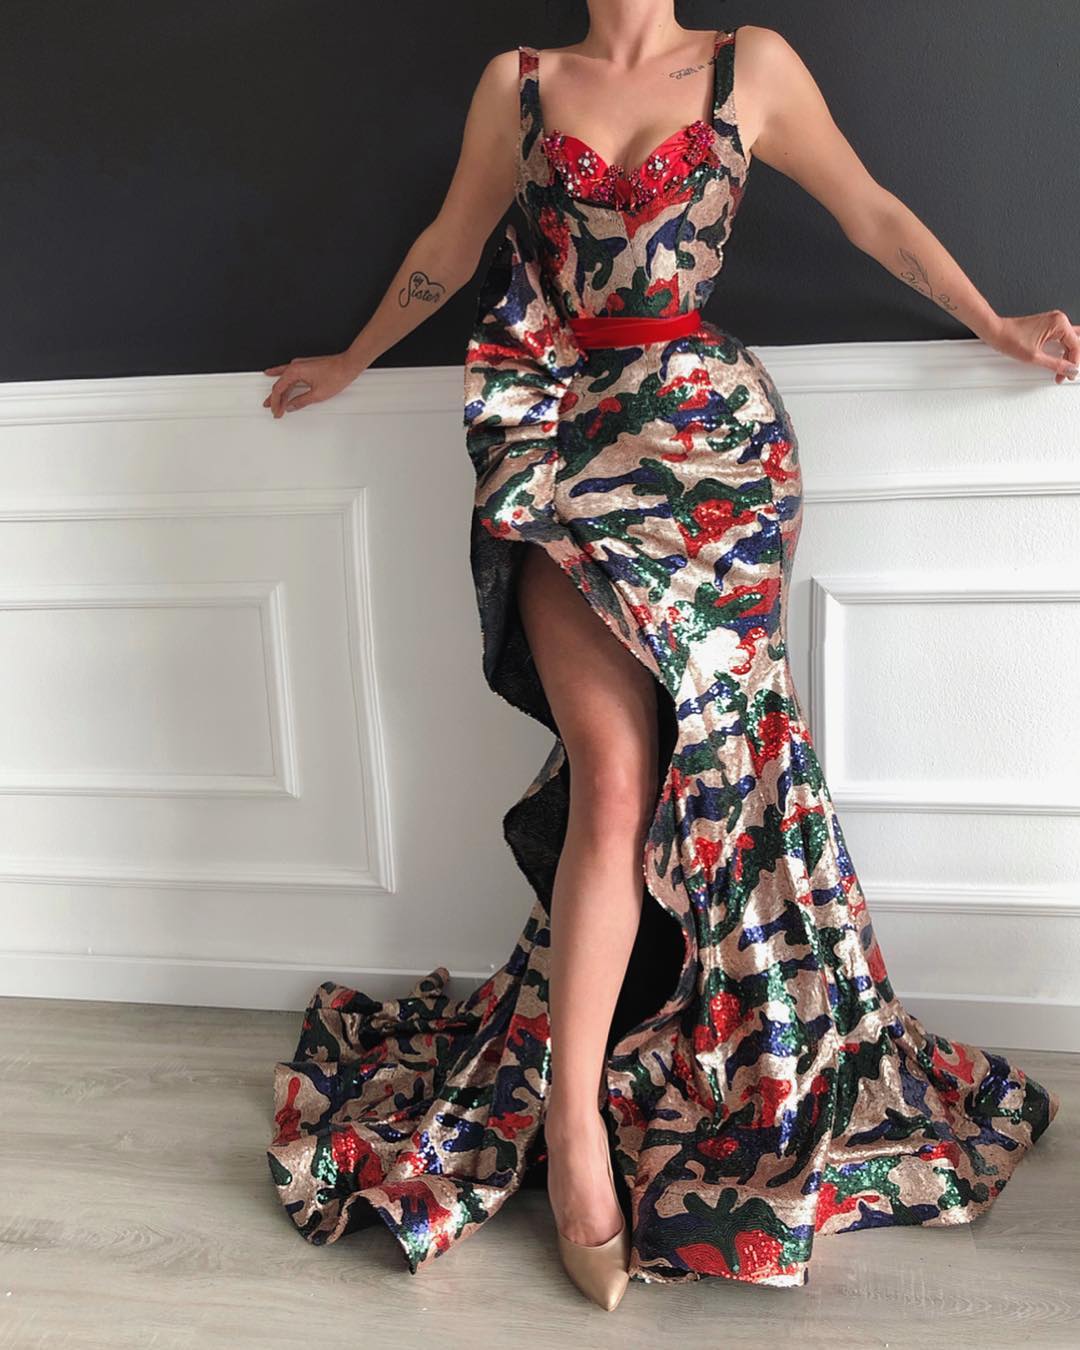 gowns for women | gowns for girls | gowns for sale | gowns for weddings | gowns for prom | gowns dresses | gowns beautiful gowns | gowns images | gowns design | gowns fashion show | gowns red military 